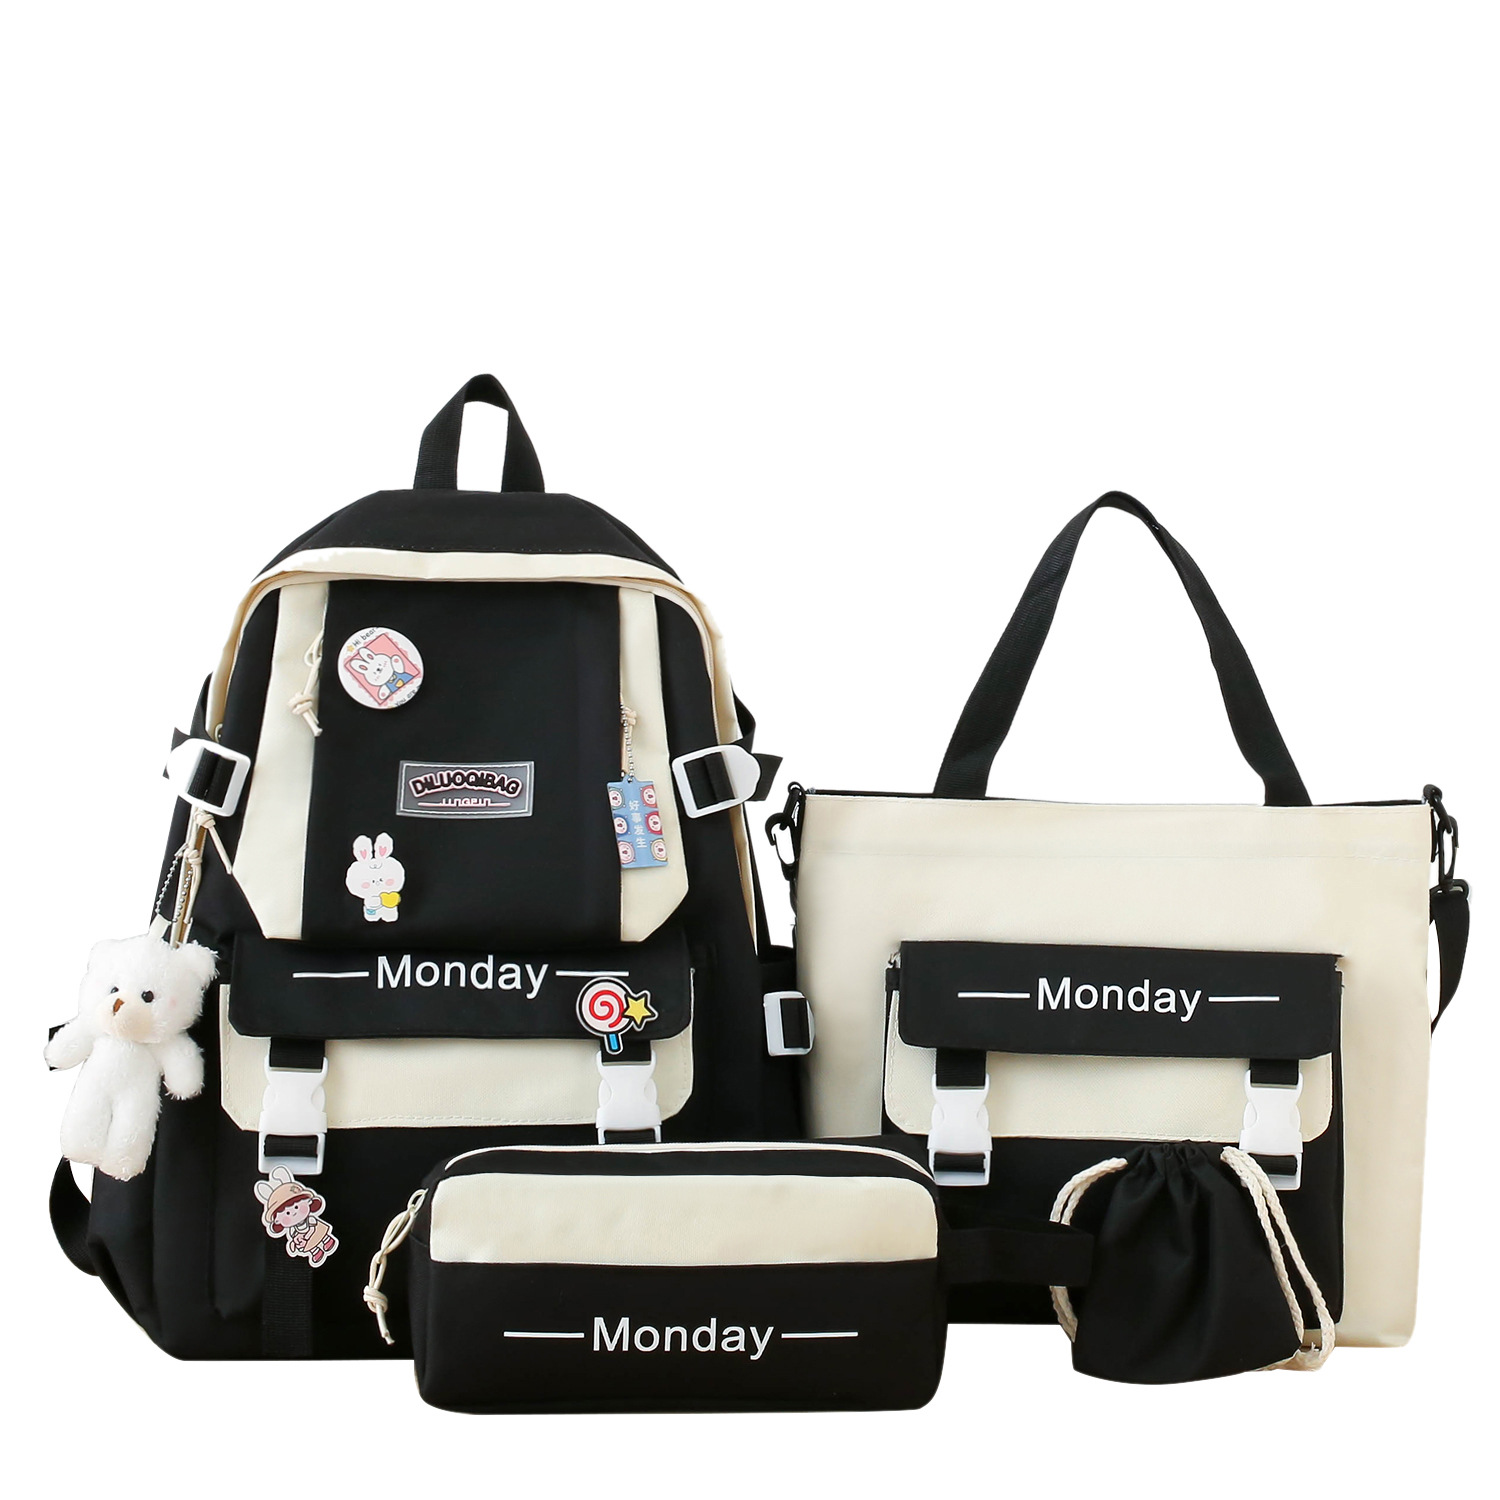 Four-Piece Schoolbag Female Mori All-Match Primary School Student Backpack Handbag Fashion Colorblock Large Capacity Junior High School Backpack